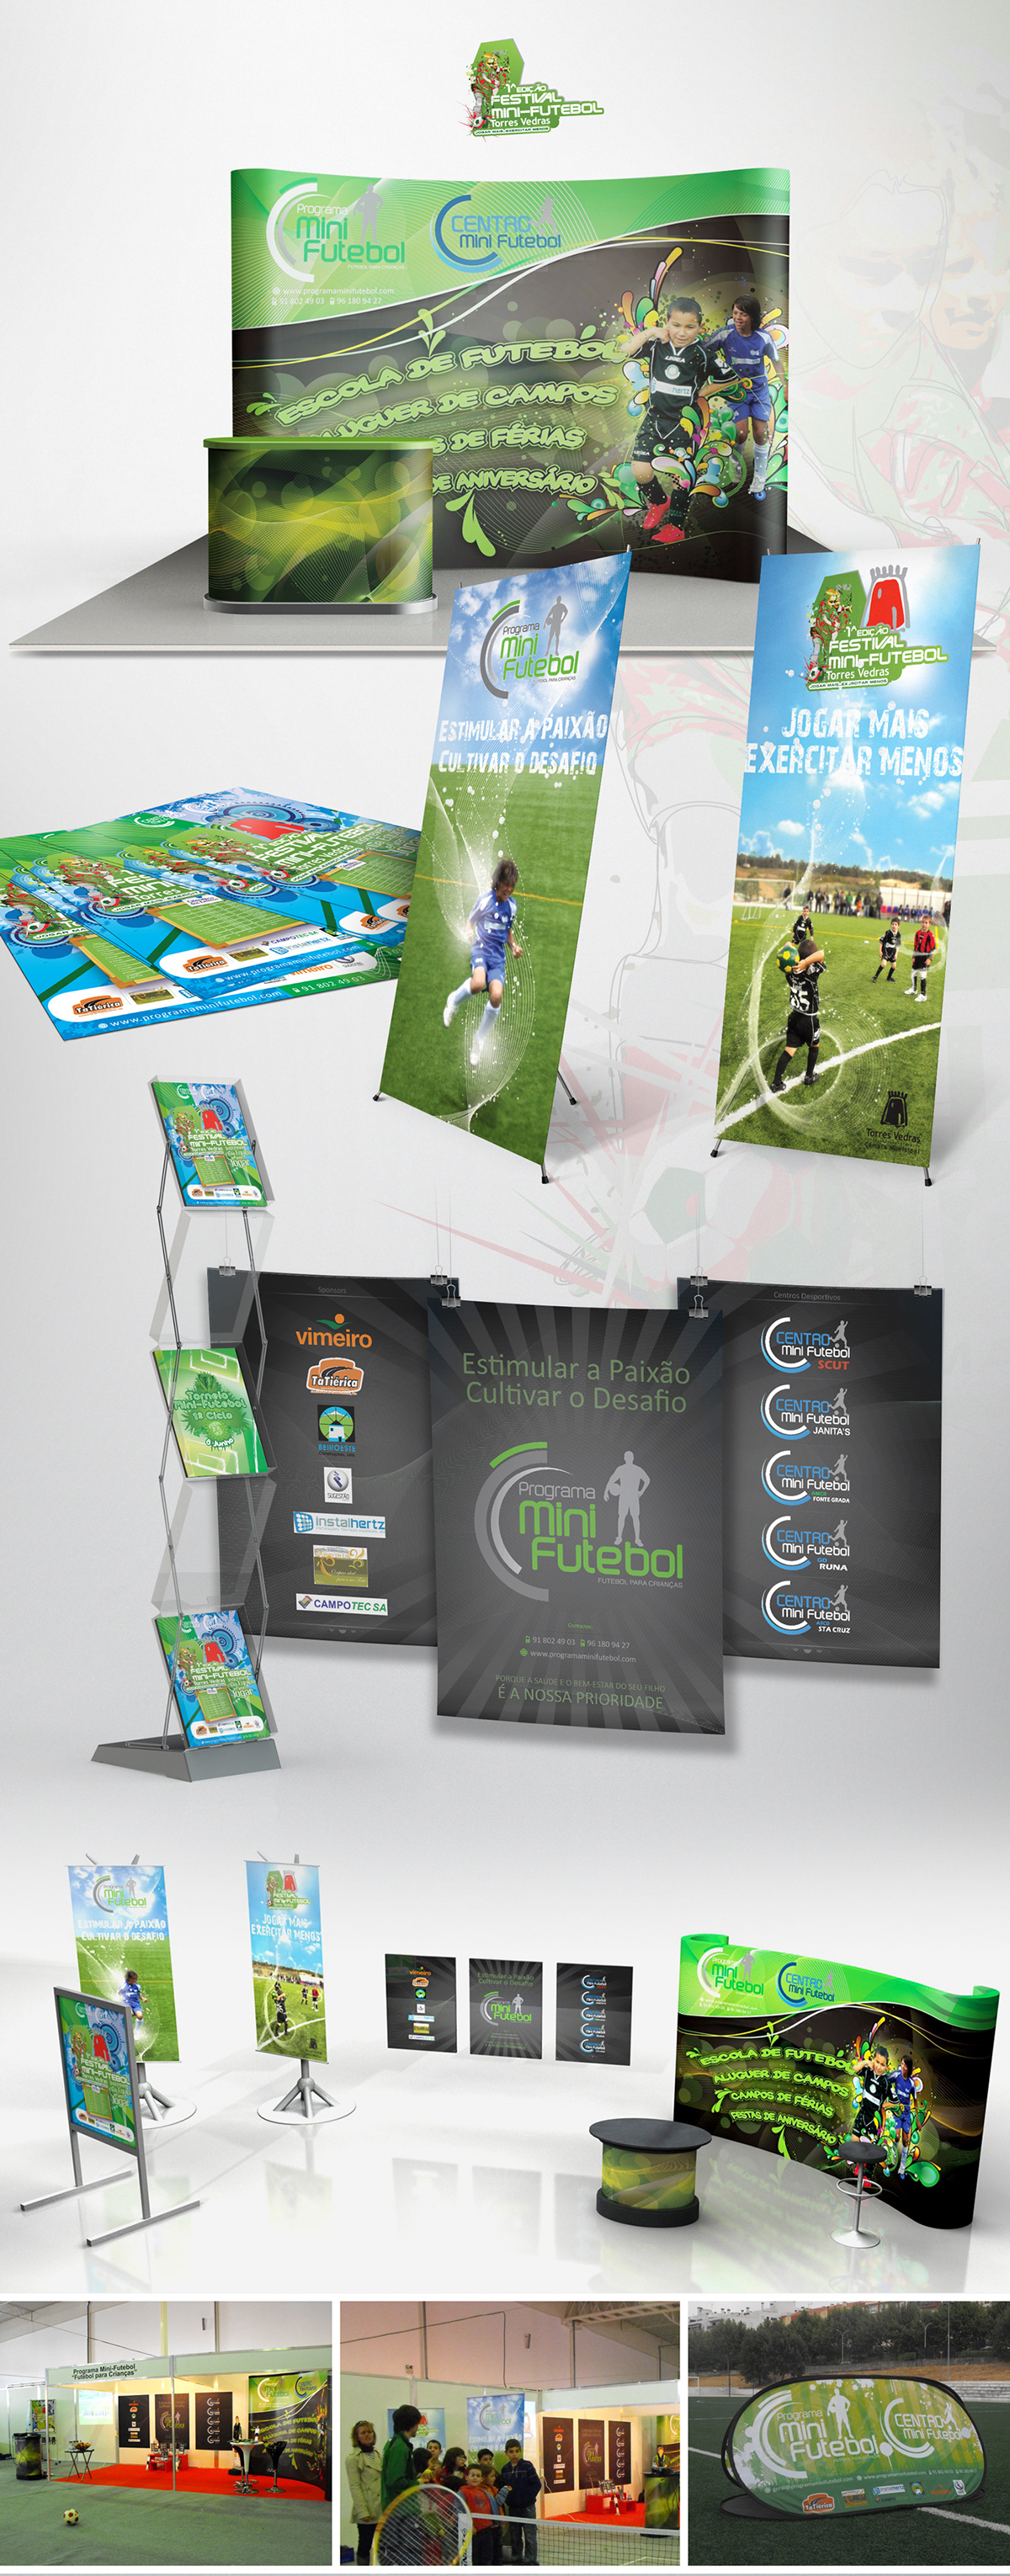 Programa Mini-Futebol Stand Exhibition  Health Fair Portugal torres vedras soccer banner sports pop-up poster flyer healthy